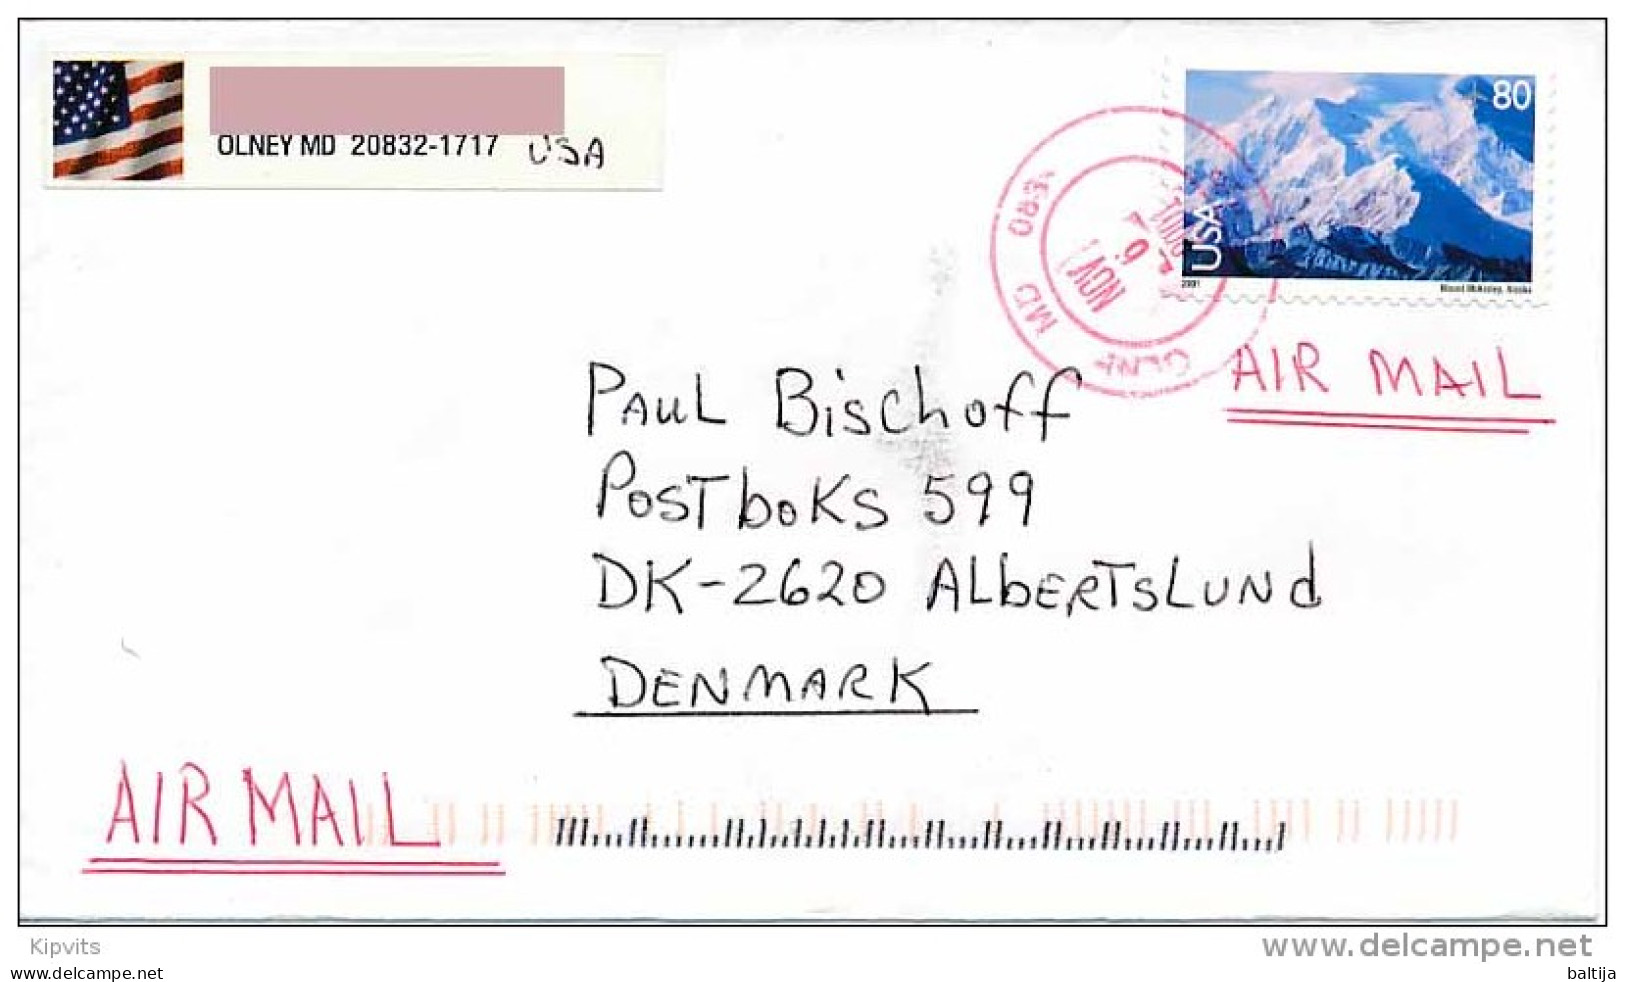 80c Mount McKinley Solo Cover Abroad - November 6, 2001 Olney MD 20832 - 3c. 1961-... Covers